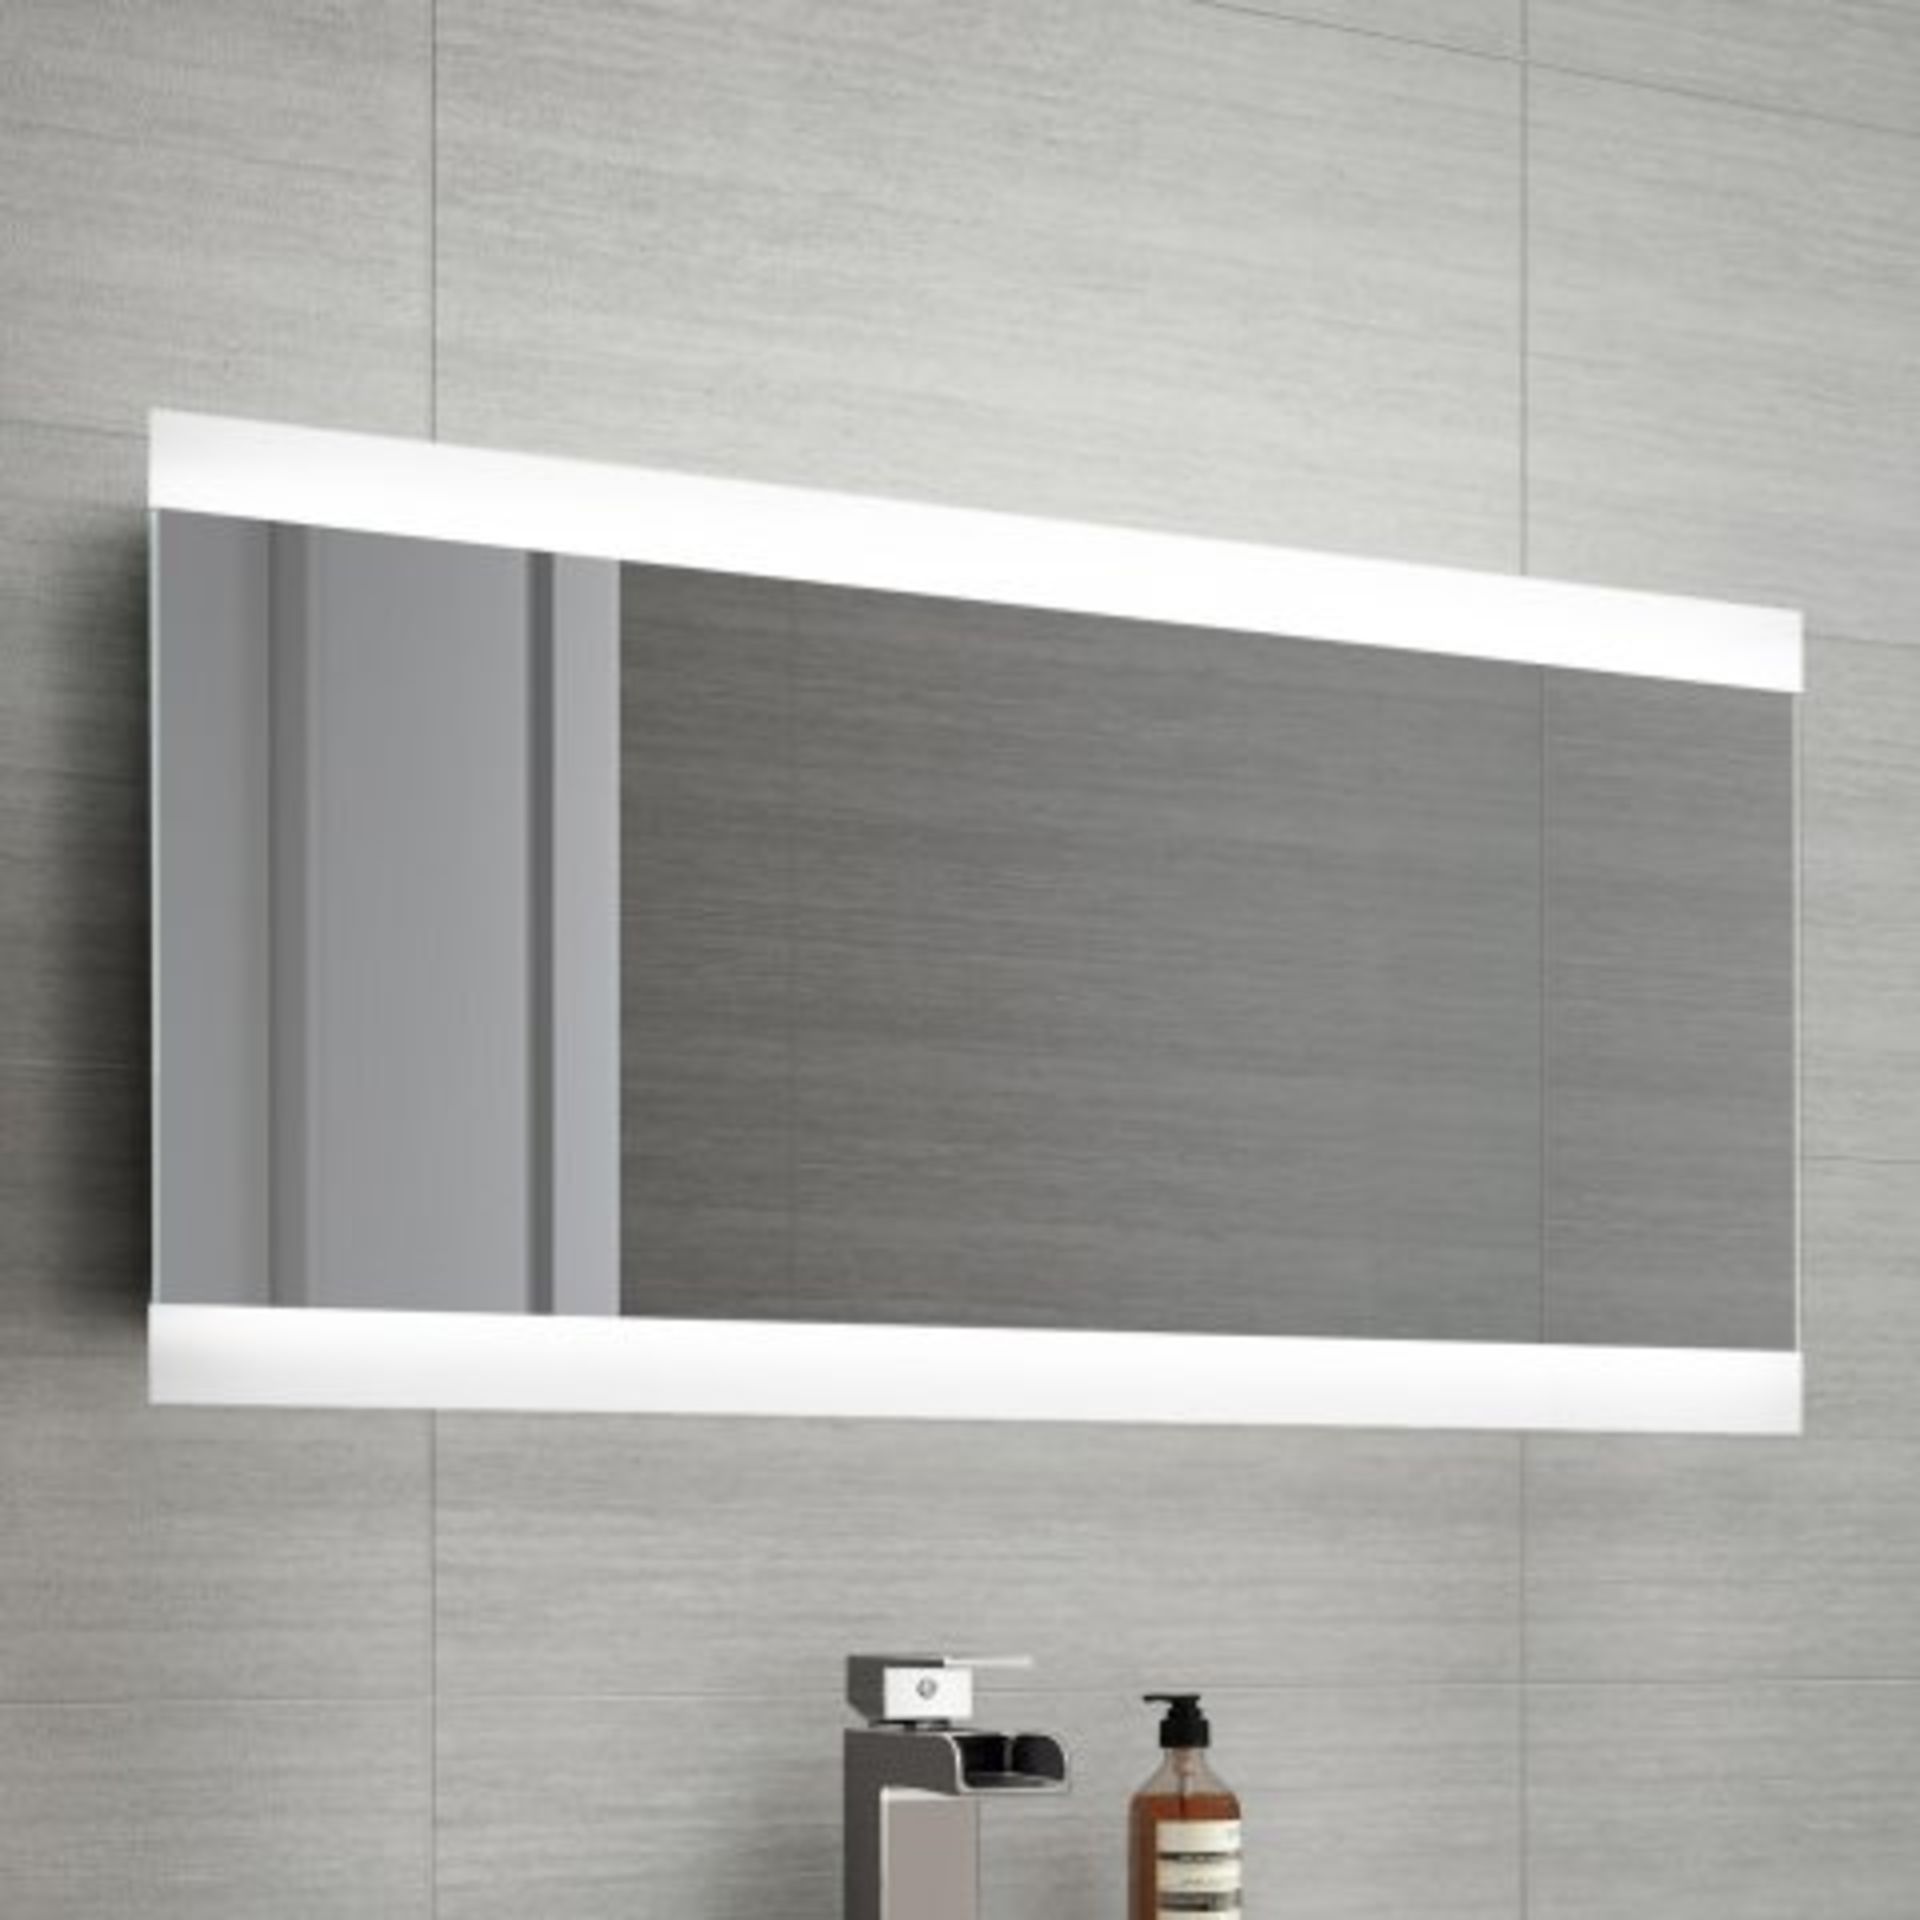 (M86) 400x800mm Aurora Illuminated LED Mirror. RRP £399.99. Sporting a streamlined appearance with